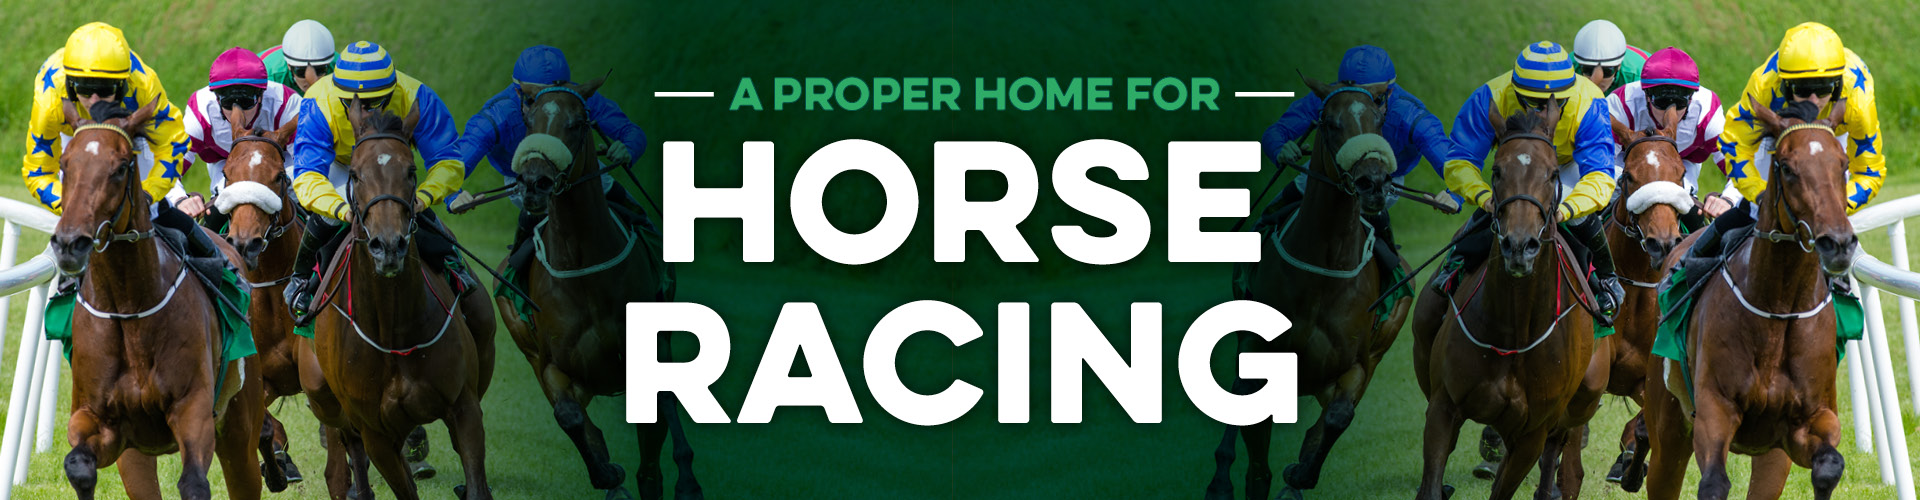 Watch horse racing live at The Sutton Arms pub